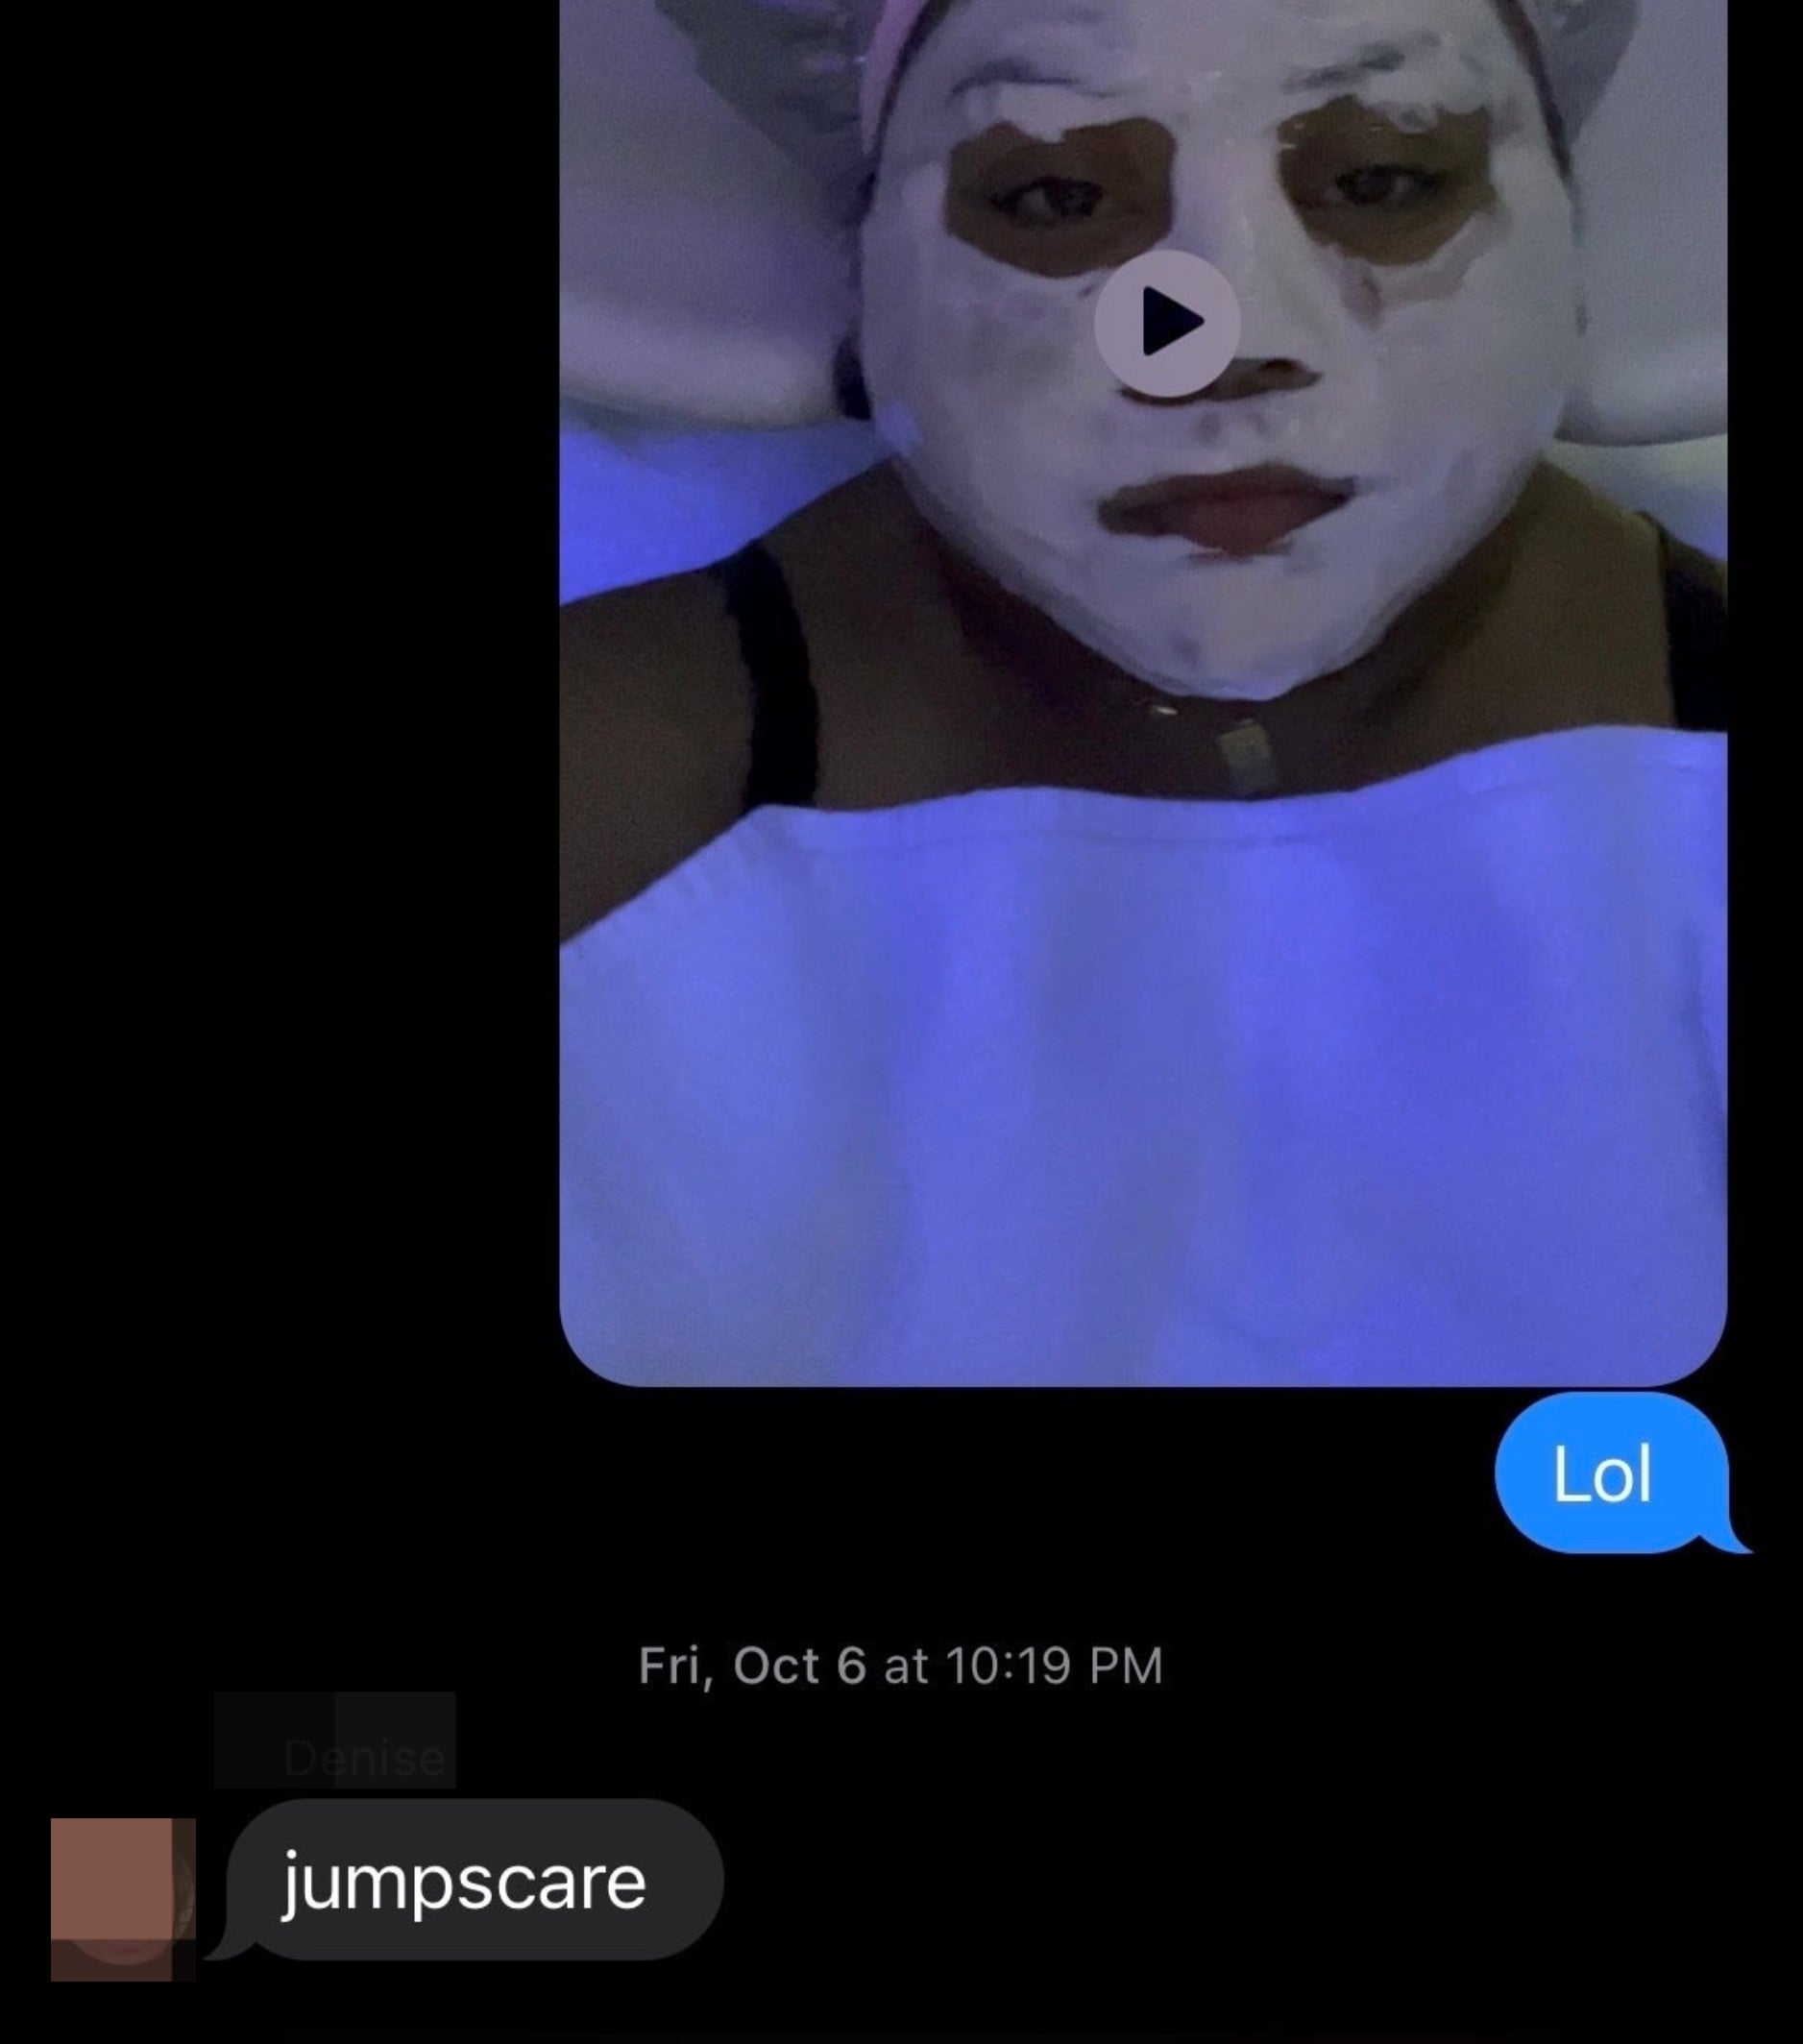 The author shows a screenshot of her sister calling her photo a jump scare